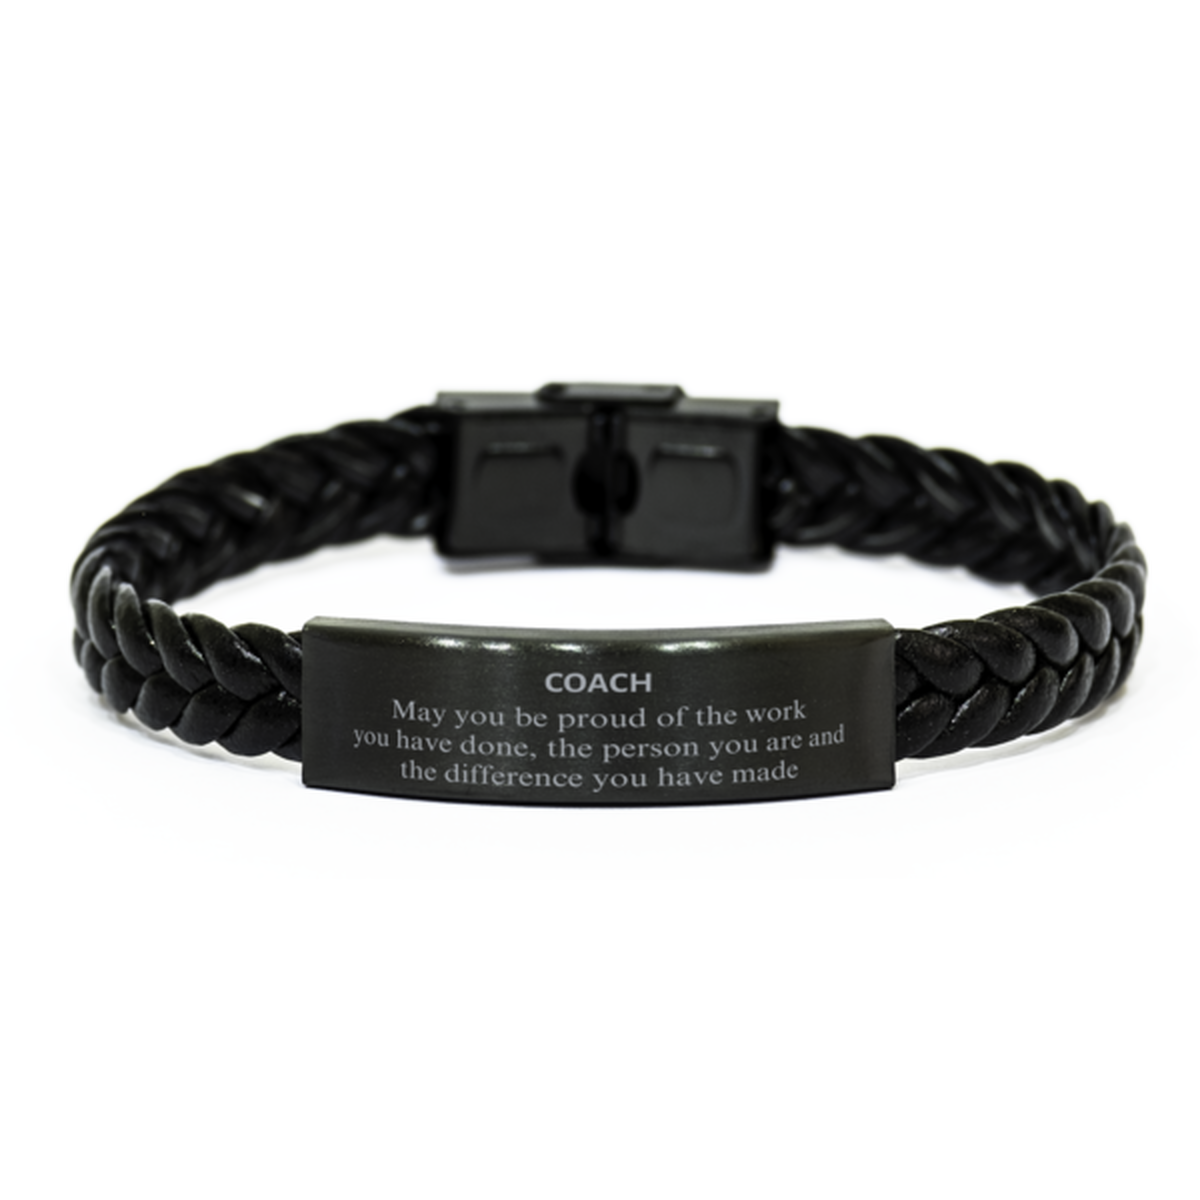 Coach May you be proud of the work you have done, Retirement Coach Braided Leather Bracelet for Colleague Appreciation Gifts Amazing for Coach